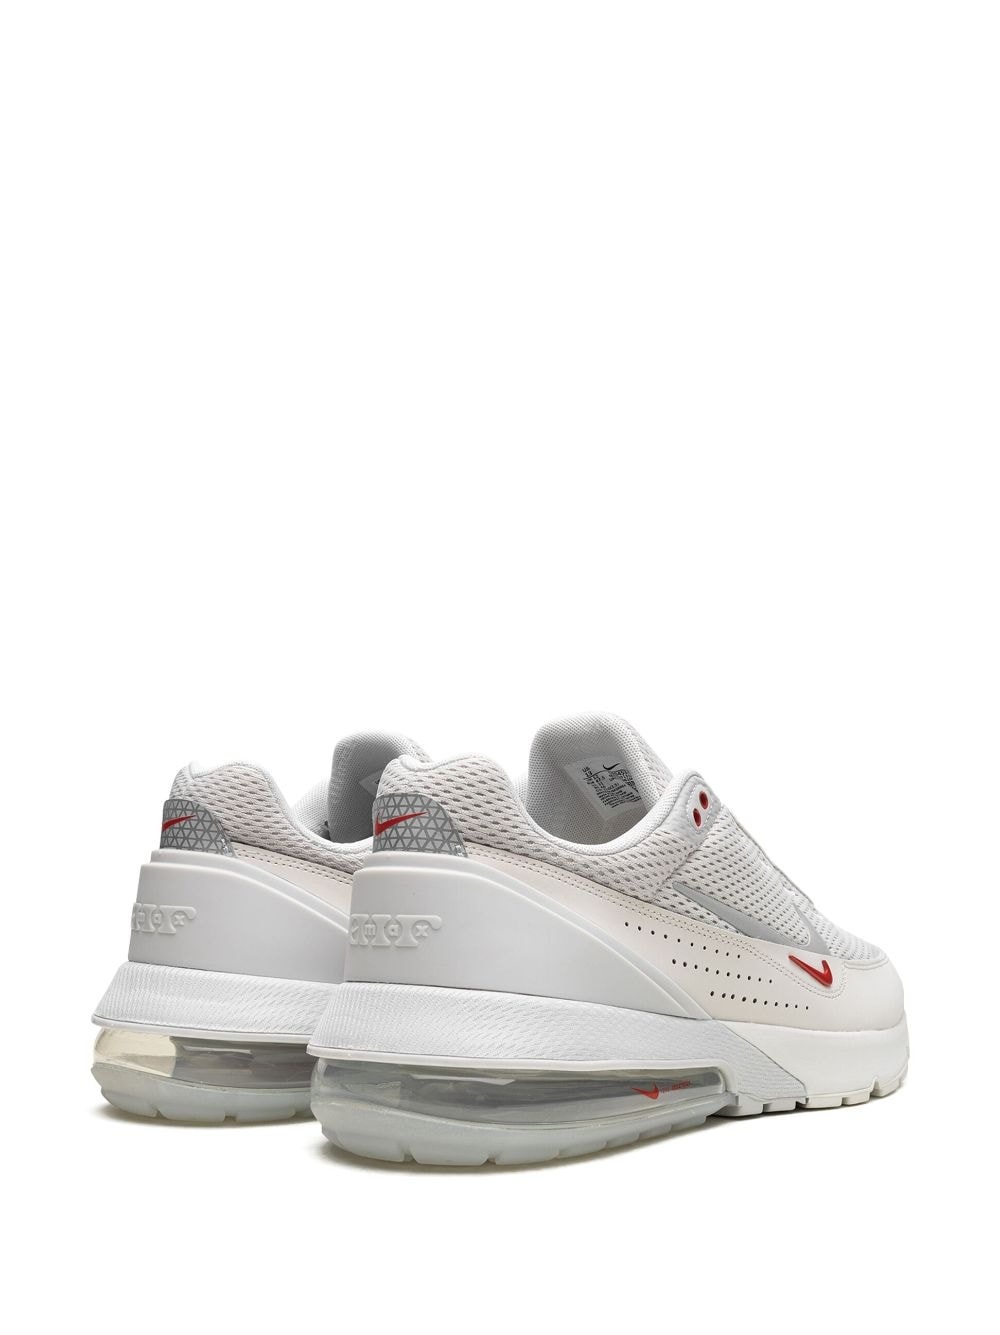 Air Max Pulse "Photon Dust" sneakers - 3